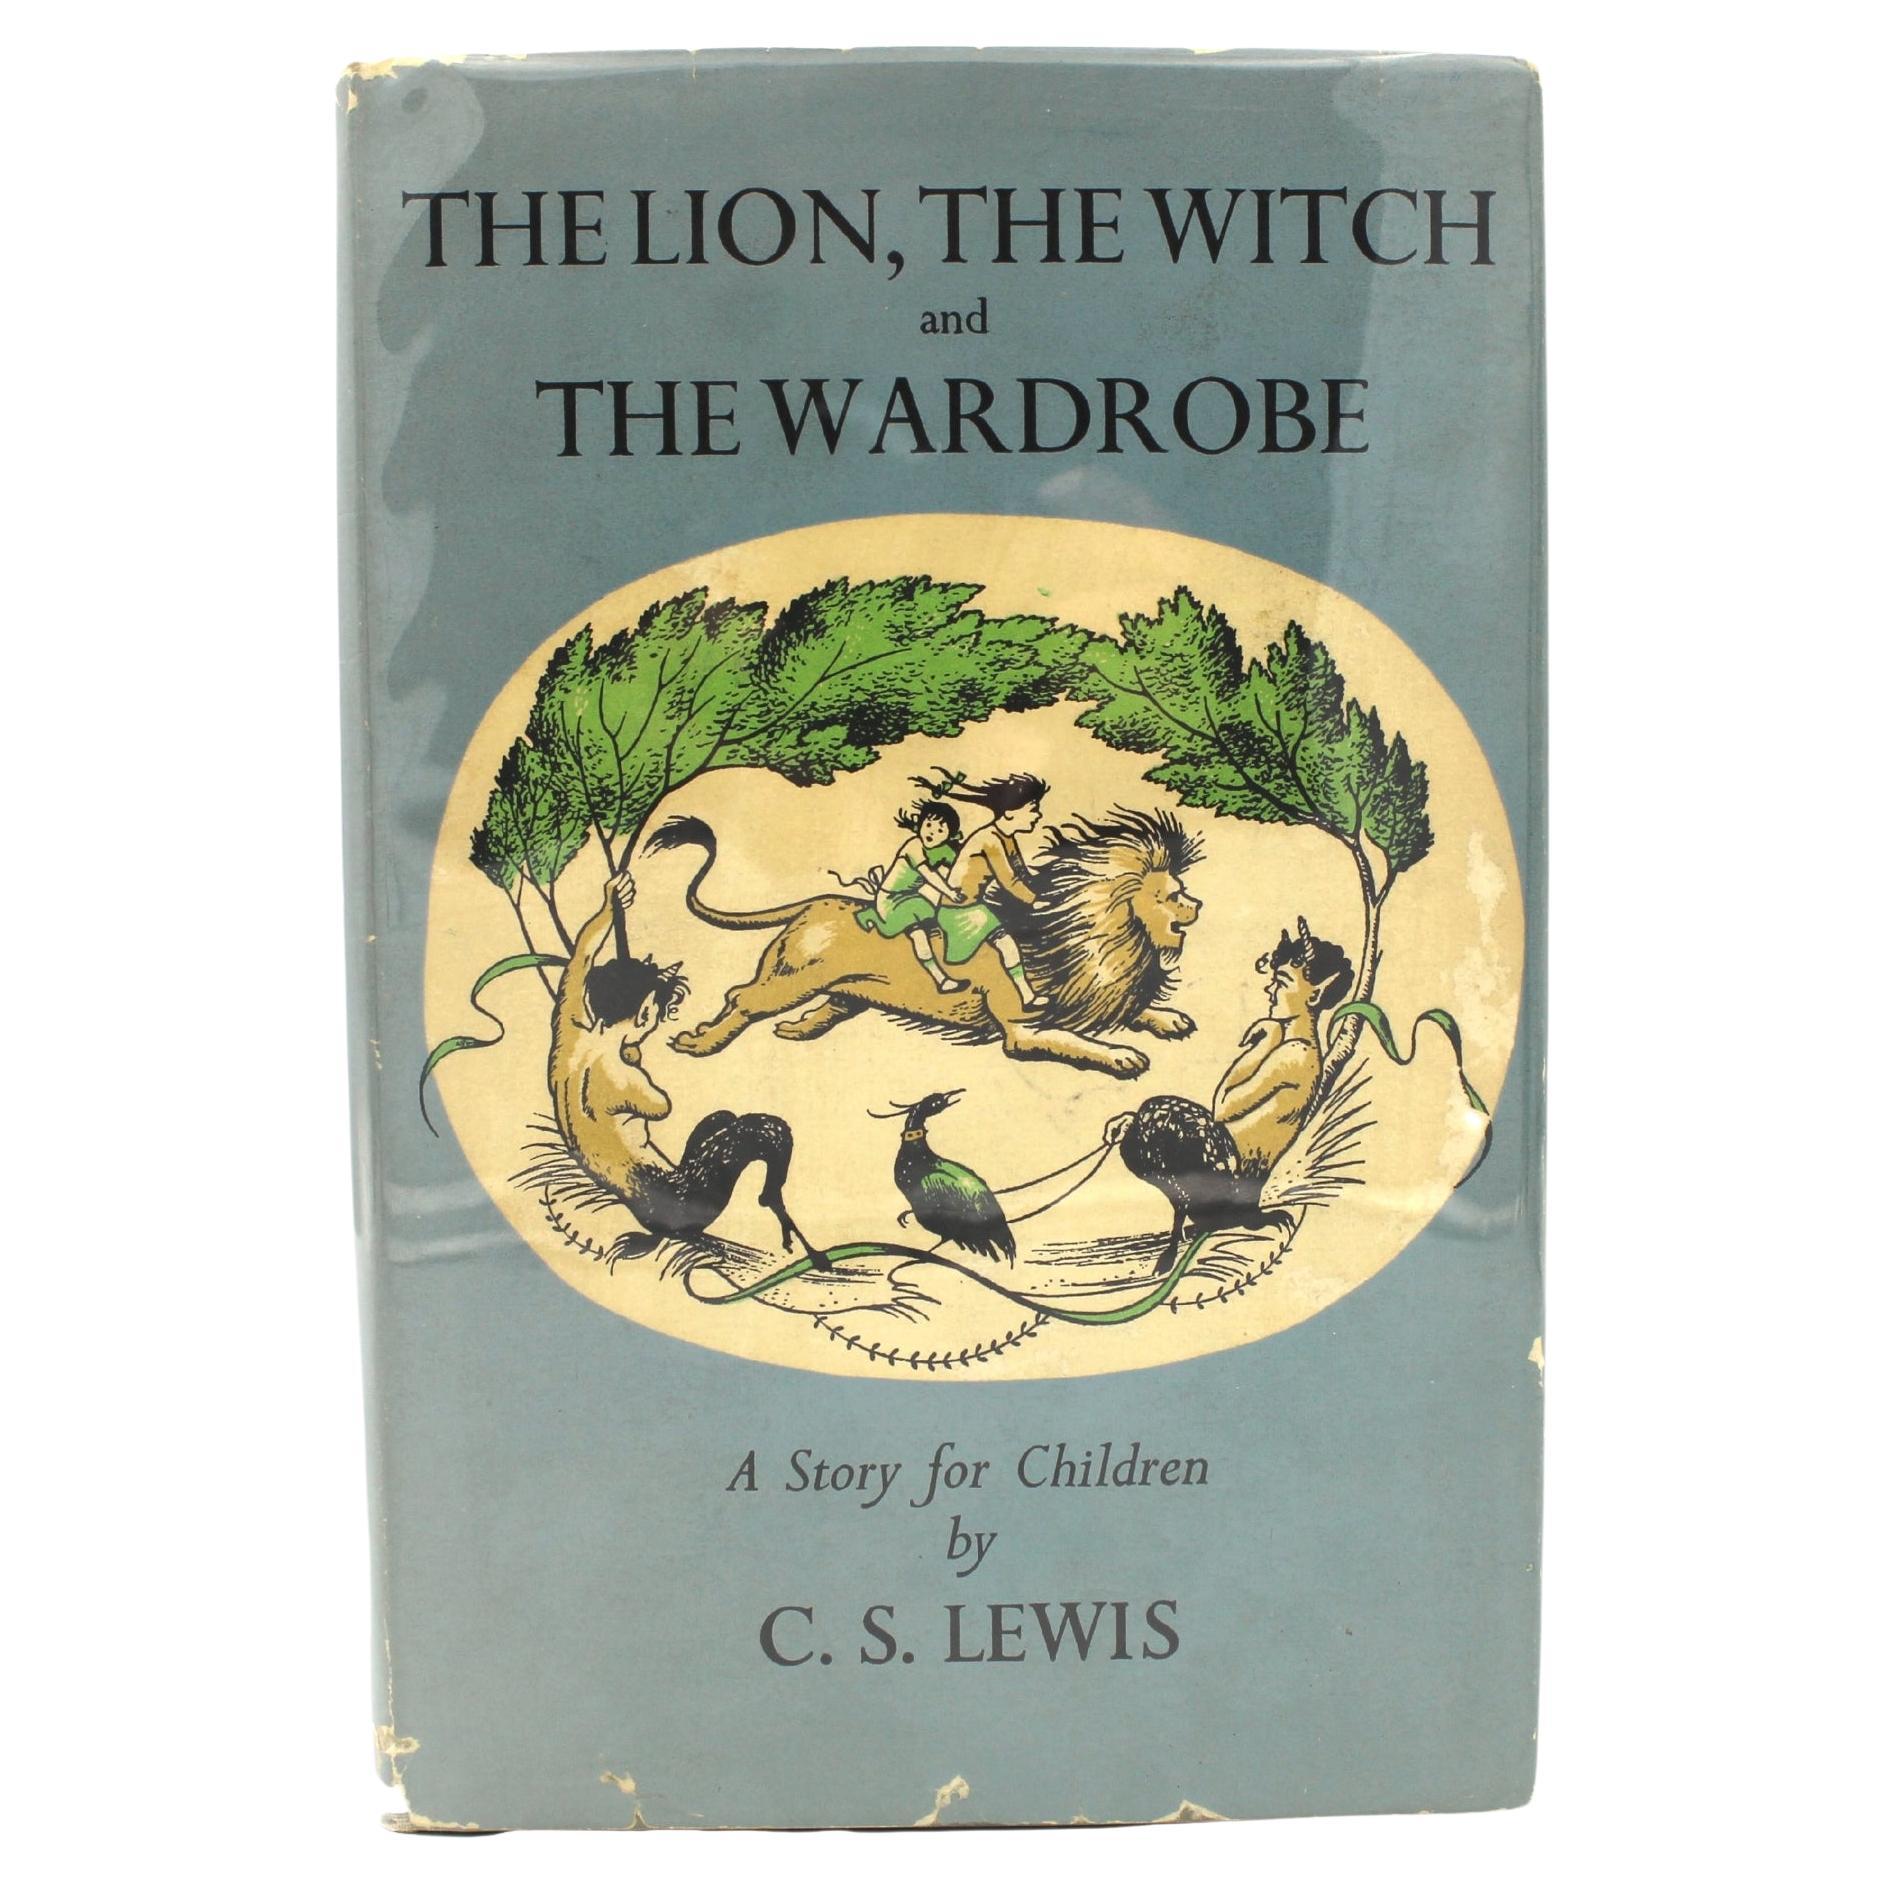 The Lion, The Witch, and The Wardrobe by C. S. Lewis, First US Edition in DJ For Sale